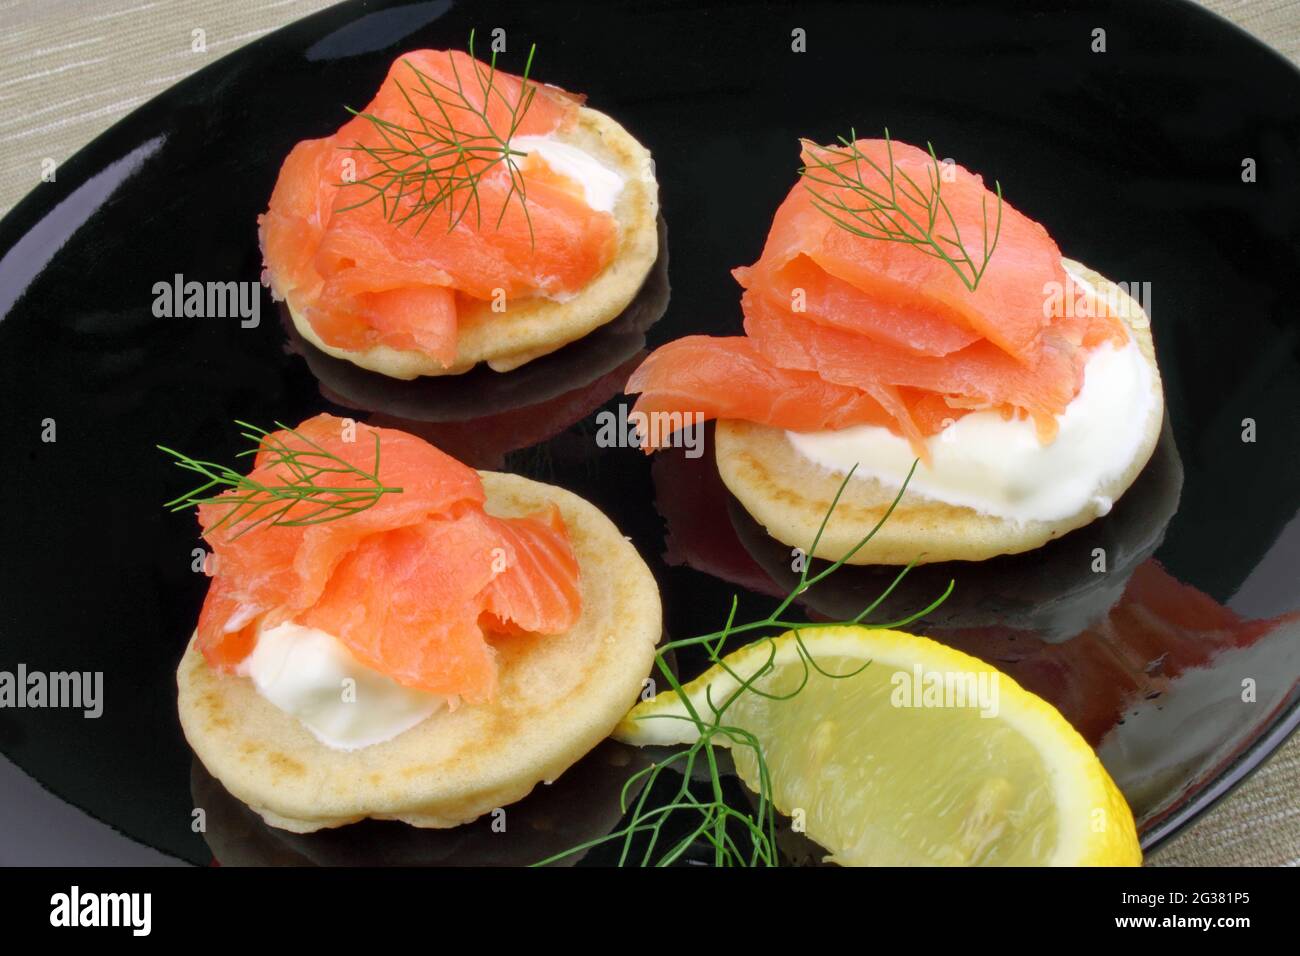 Blinis pancakes served with Crème Fraiche, Smoked Salmon and garnished with Dill. Stock Photo